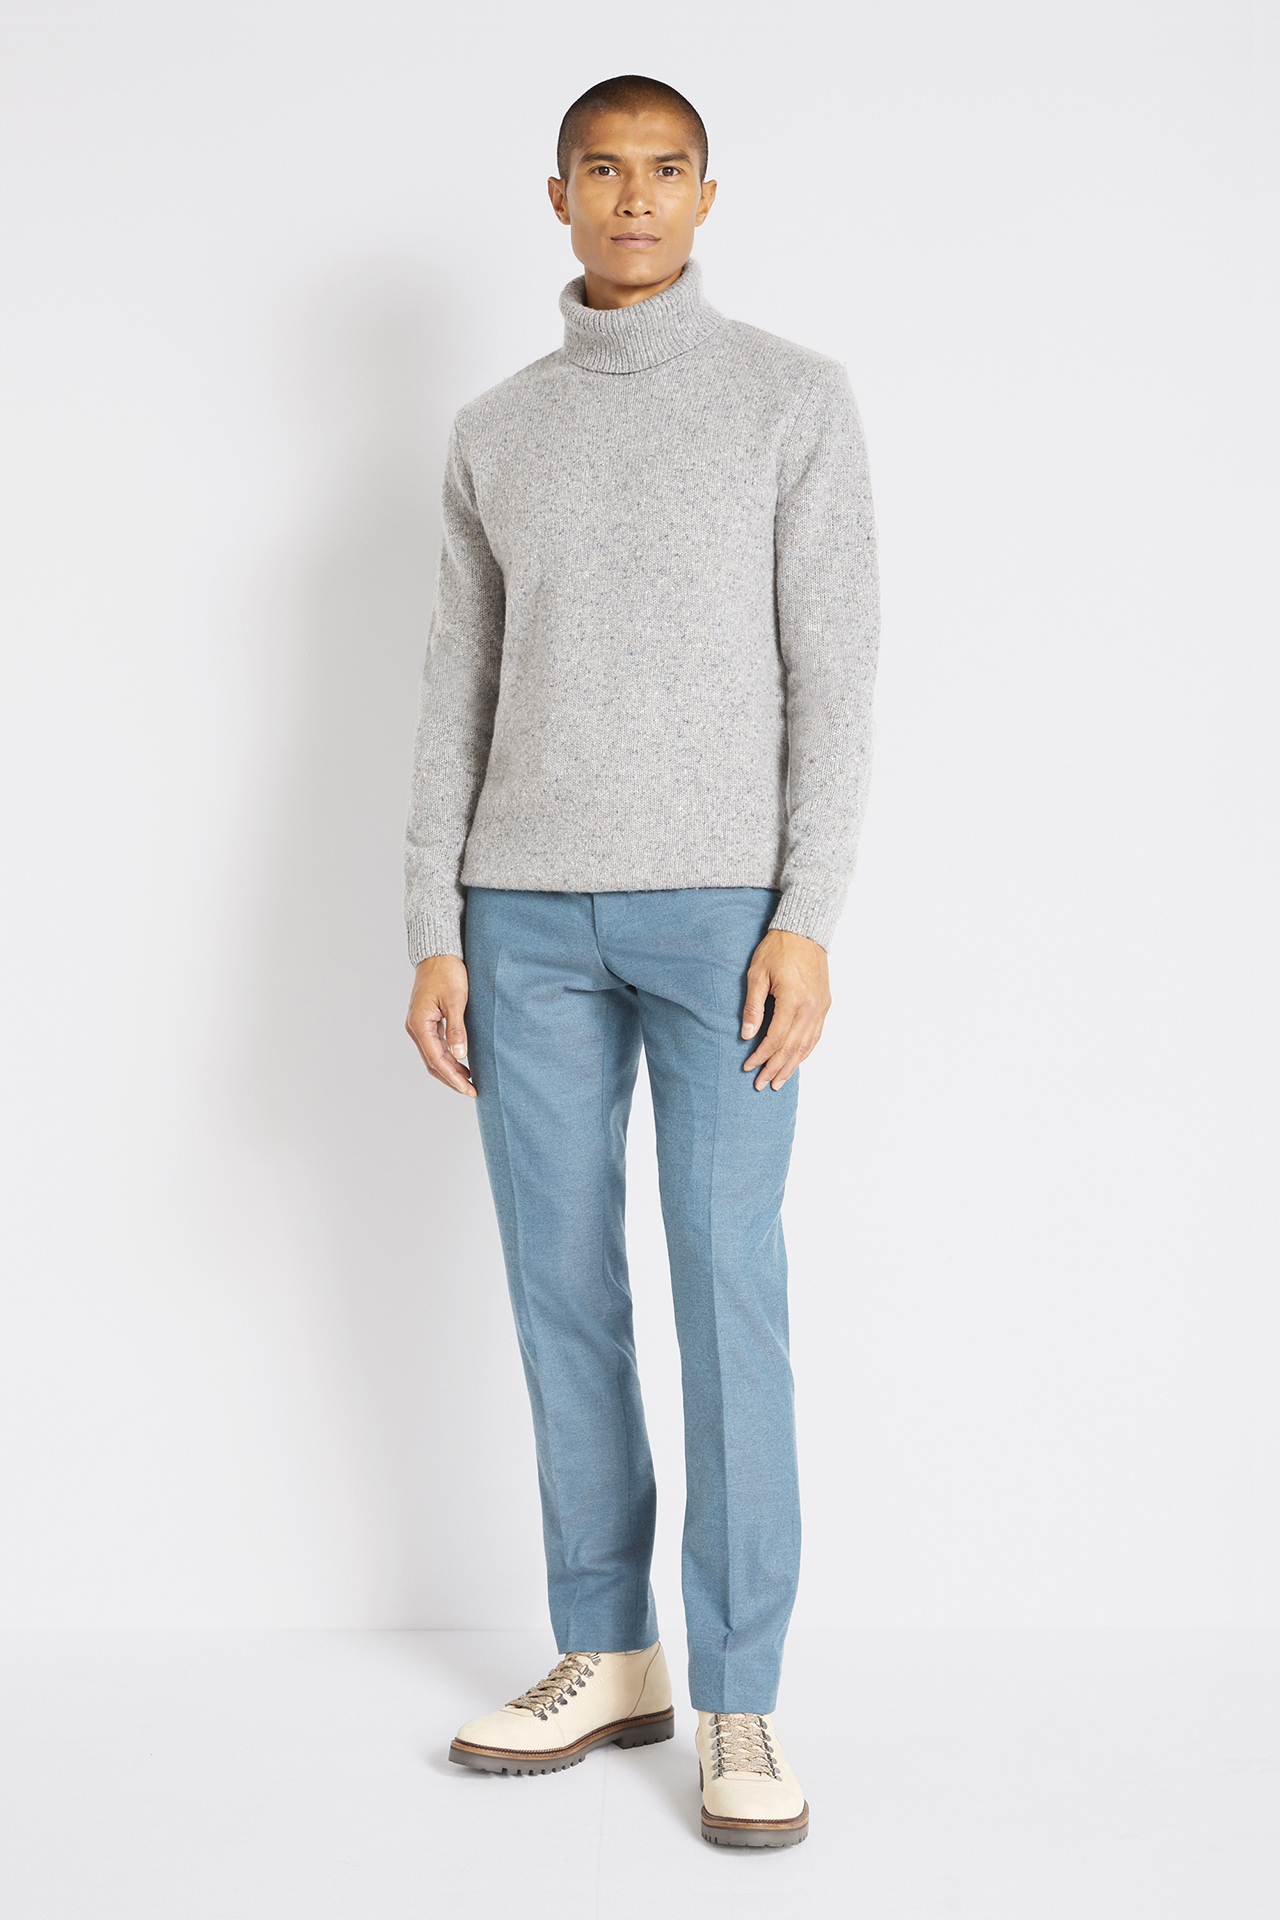 Wearing a grey turtleneck with a light blue jeans